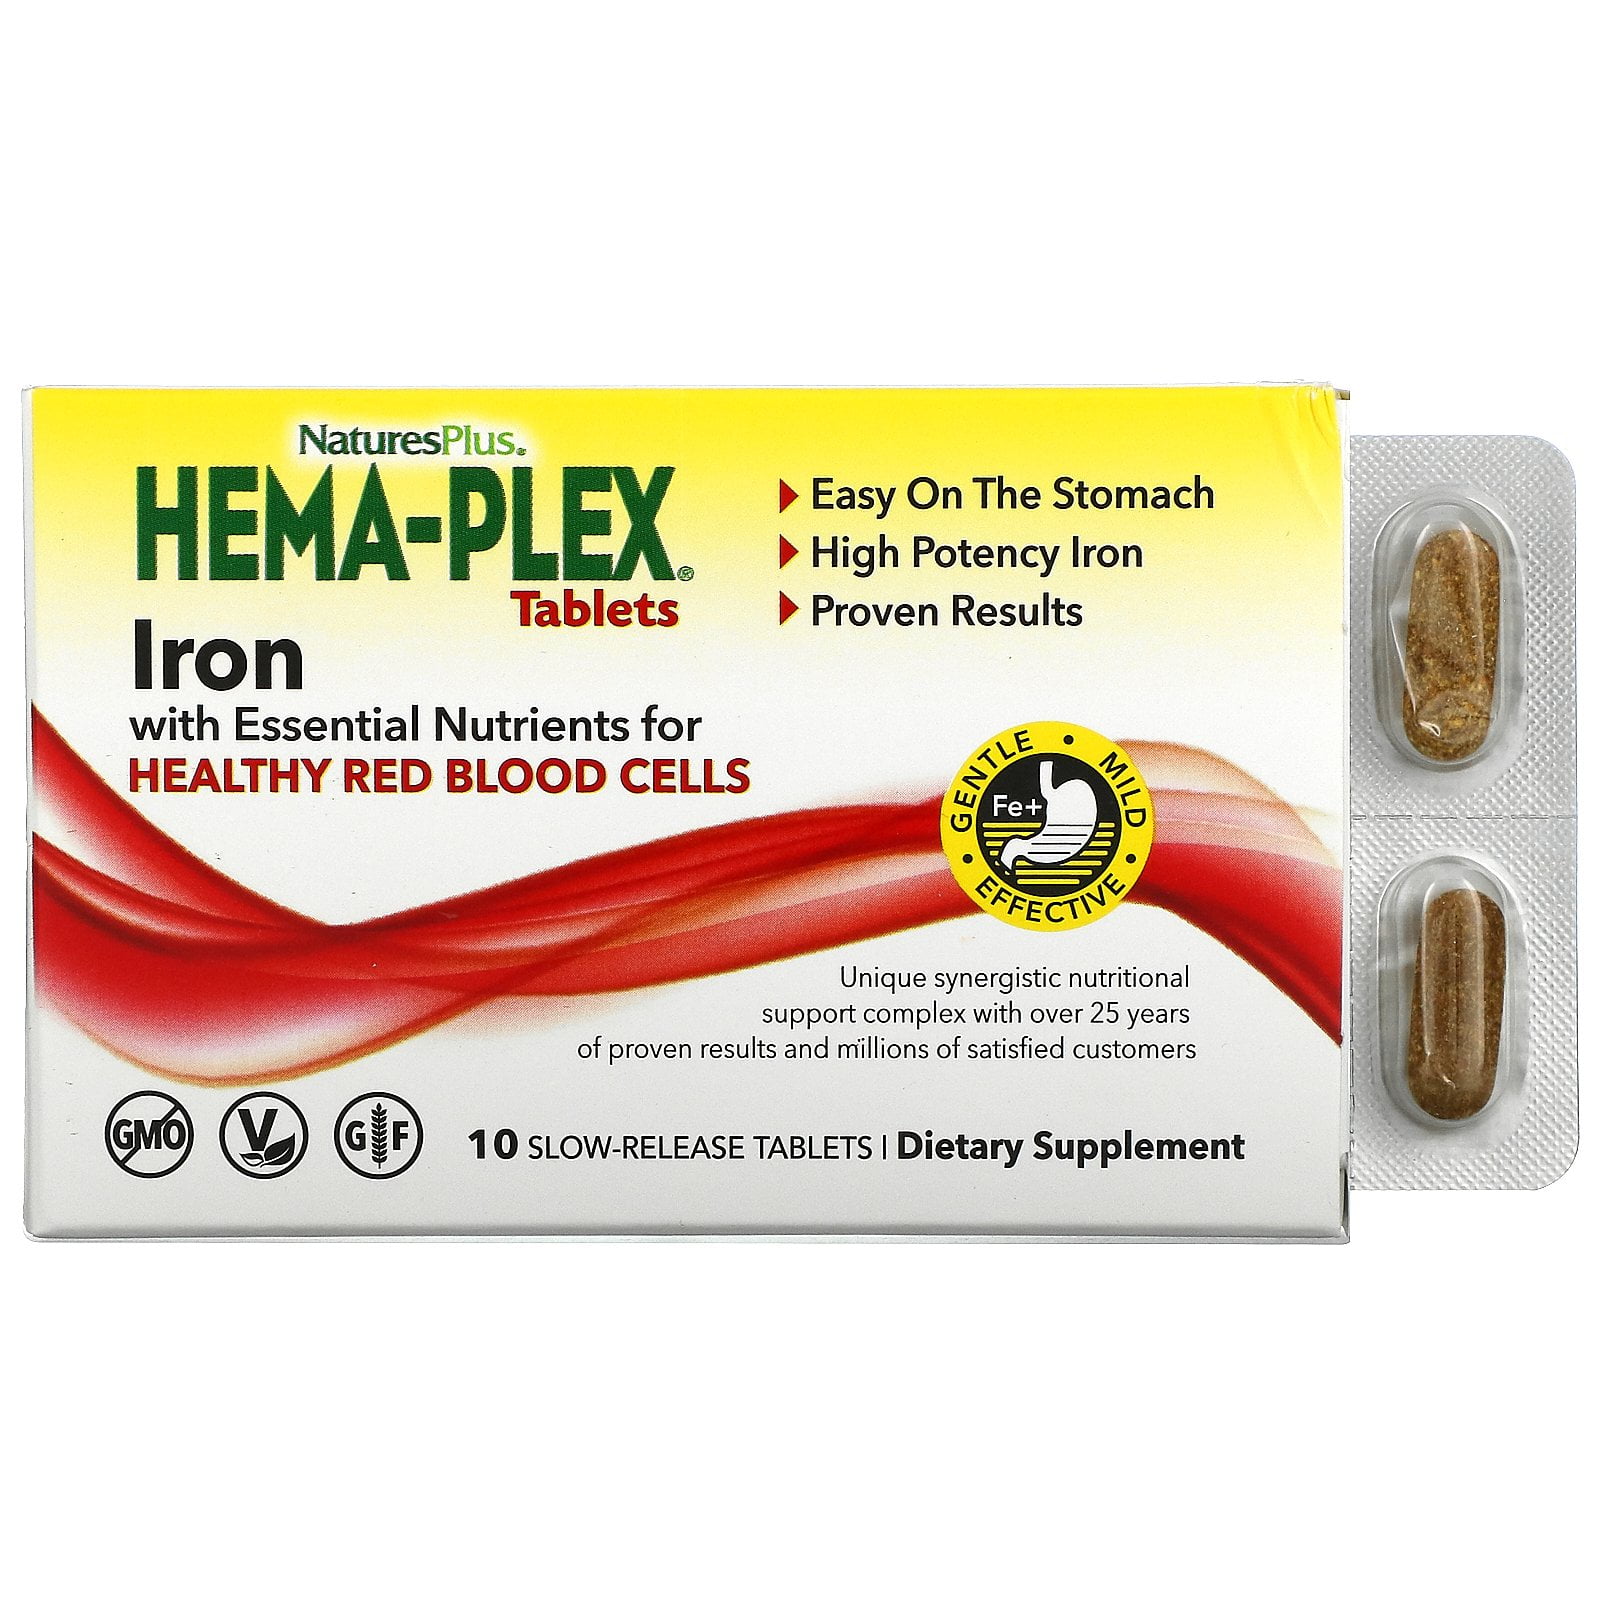 Bedrog bekennen leer Nature's Plus Hema-Plex, Iron with Essential Nutrients for Healthy Red  Blood Cells , 10 Slow Release Tablets - Walmart.com